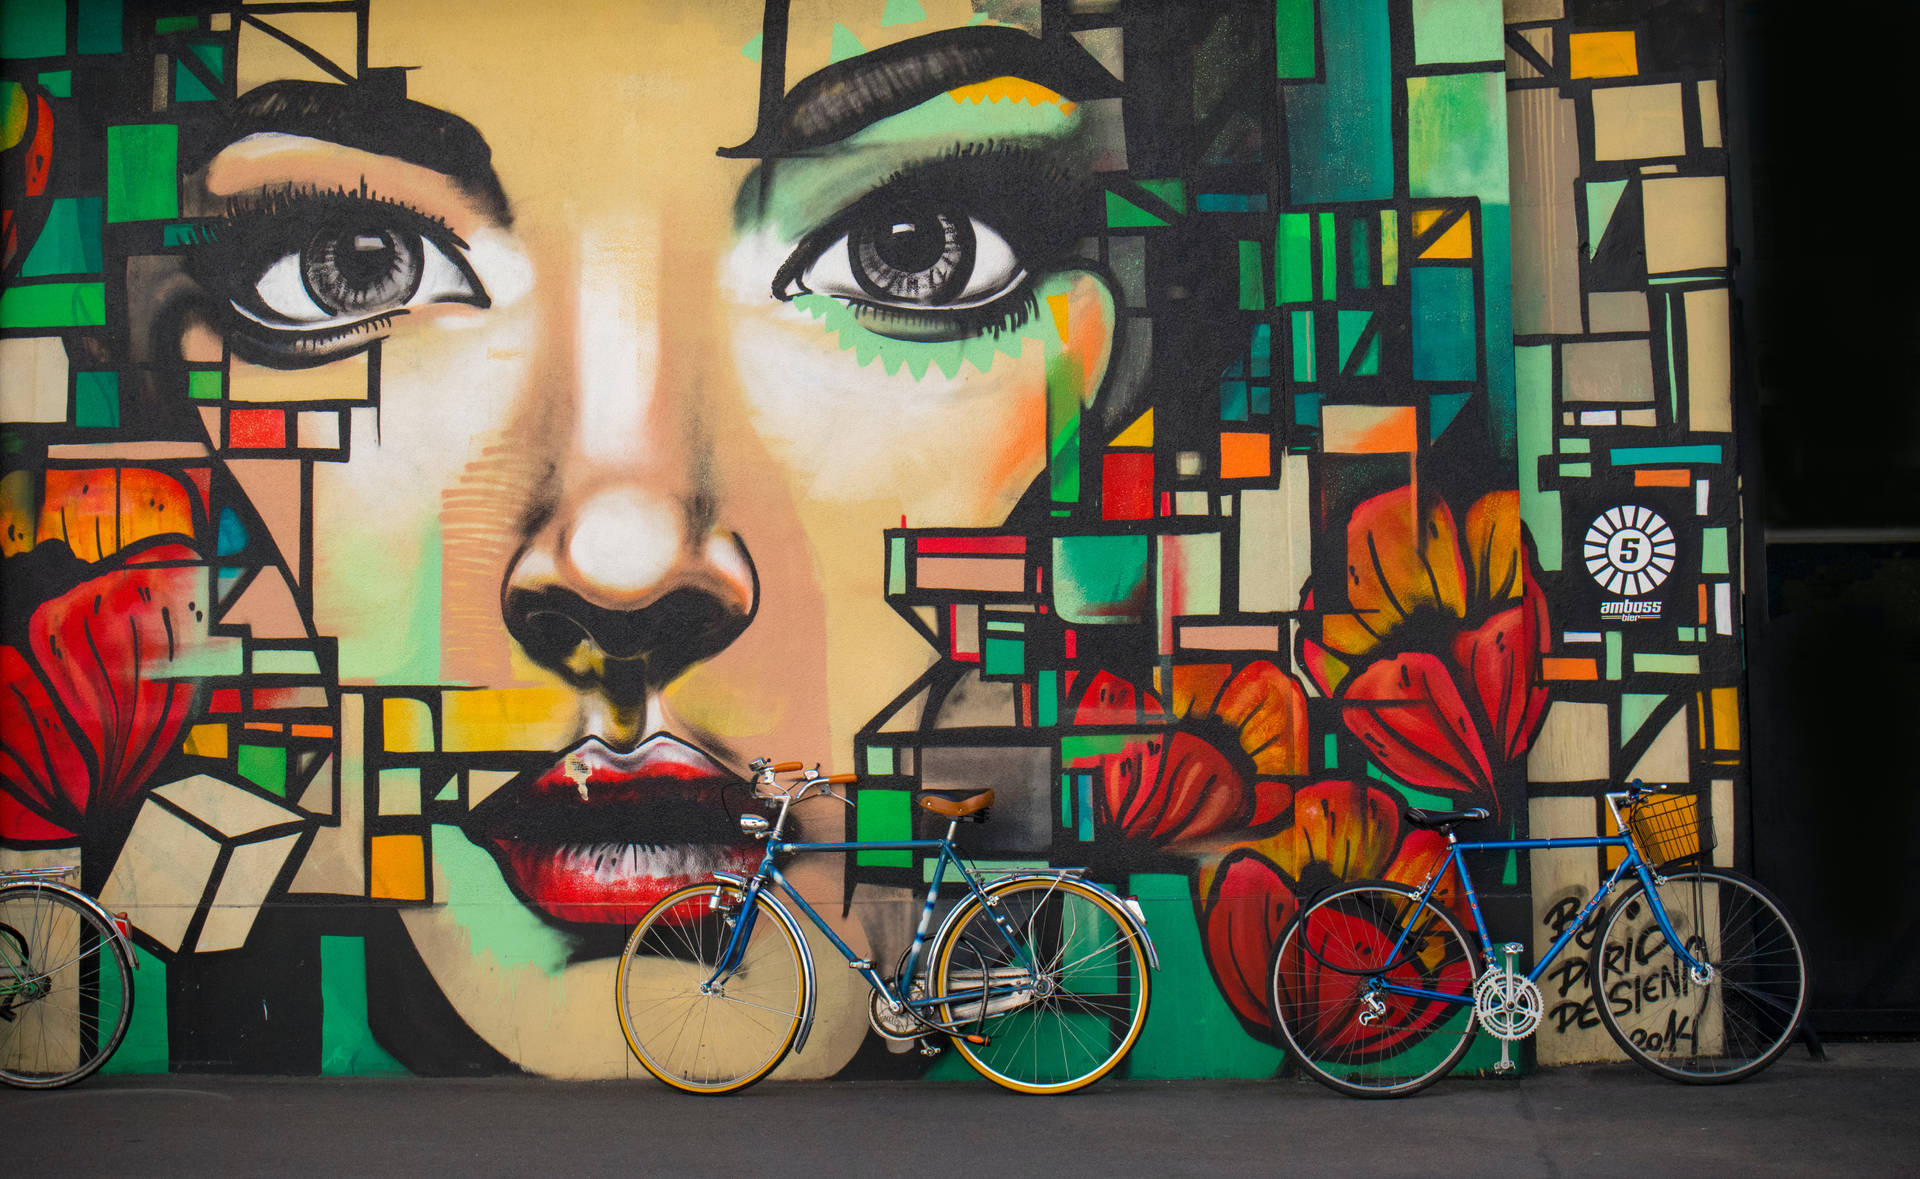 Hd Art Wall With A Parked Bicycle